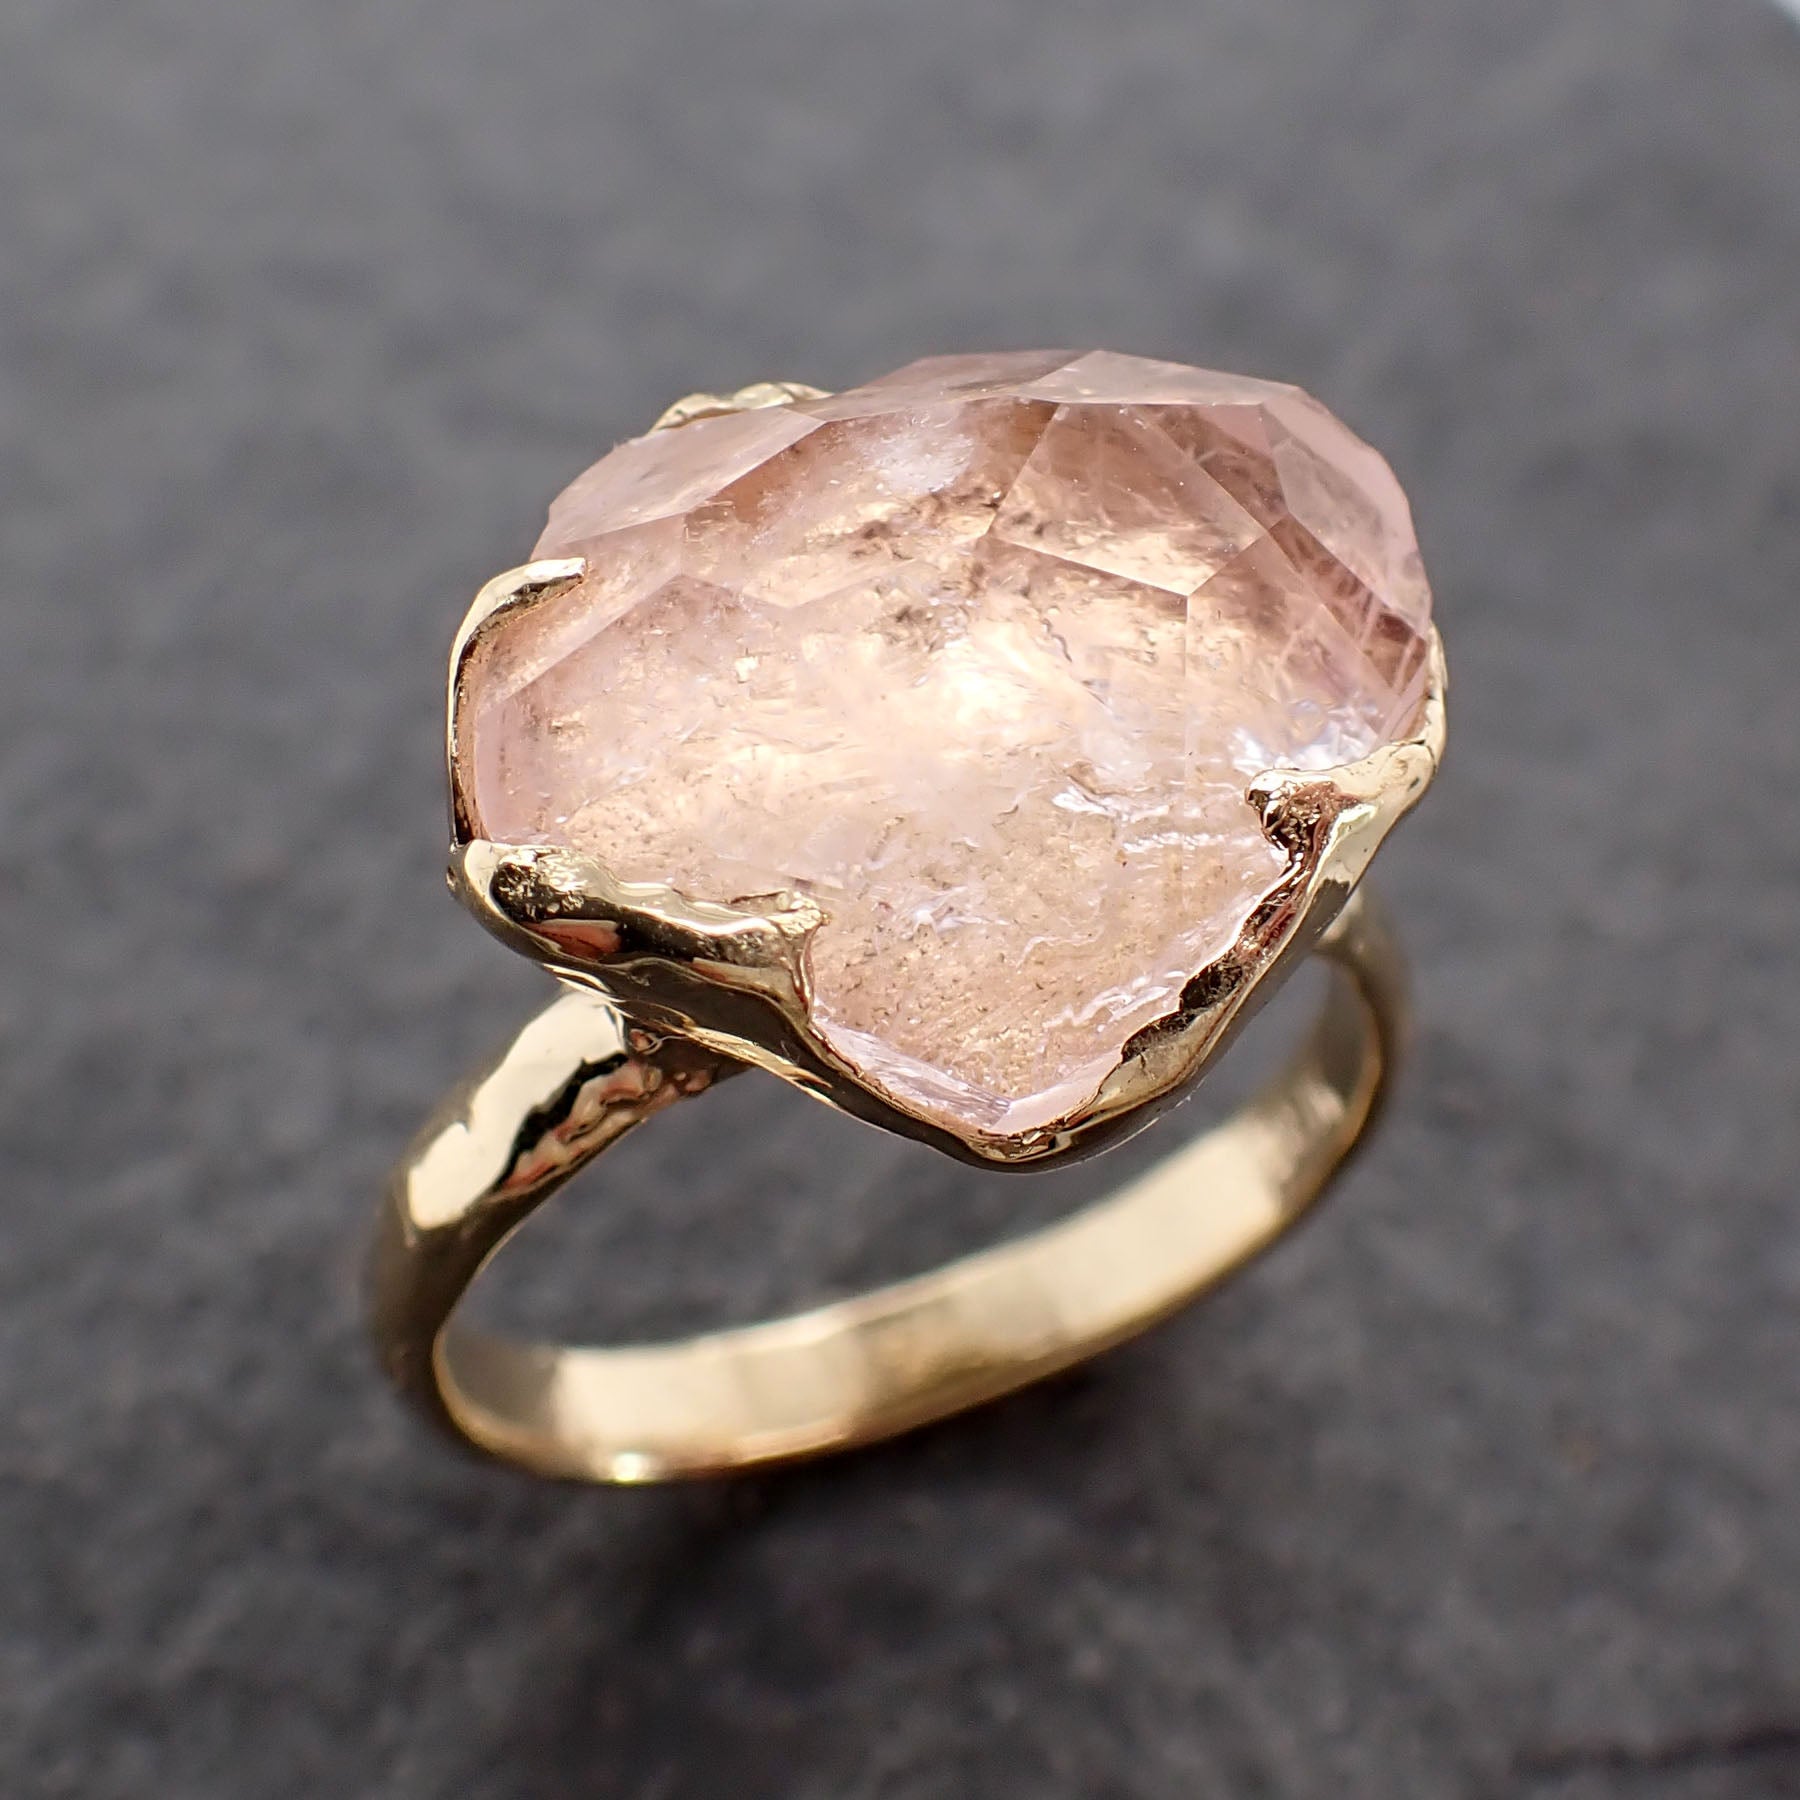 Partially faceted Morganite 18k Yellow gold solitaire Pink Gemstone Cocktail Ring Statement Ring gemstone Jewelry byAngeline 2568